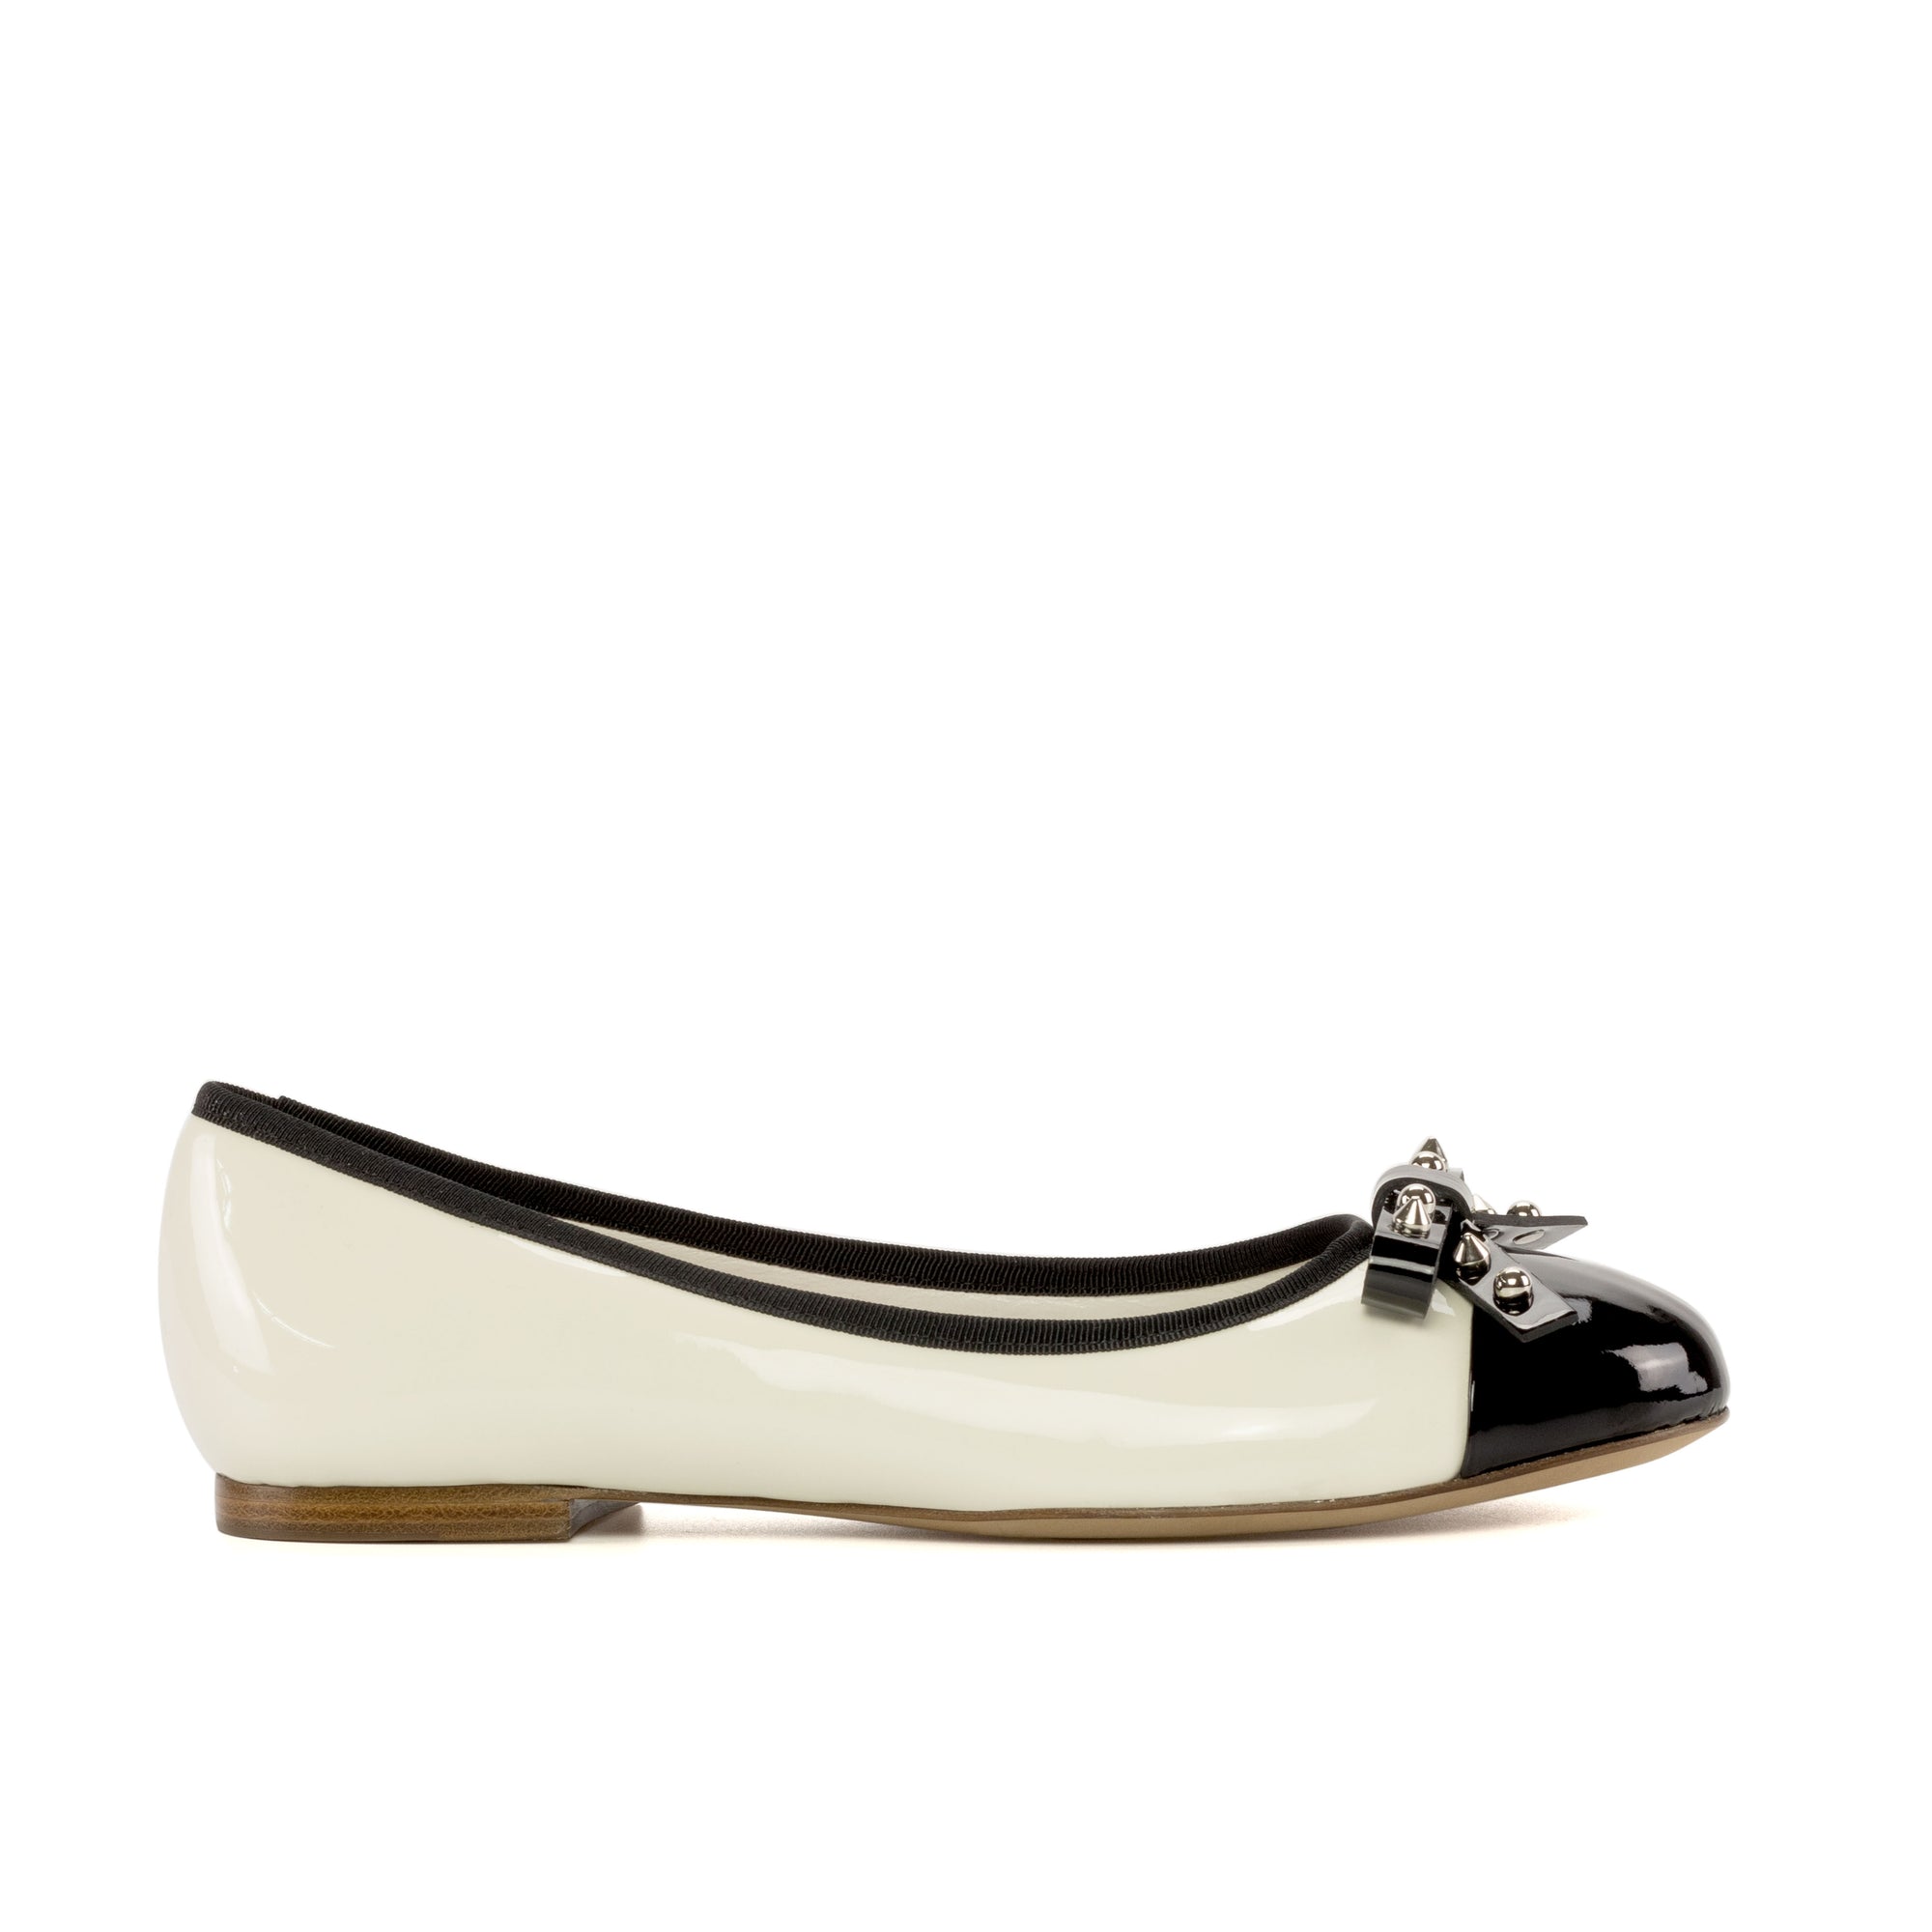 Black and White Patent Ballet Flats, Shoes for Wedding